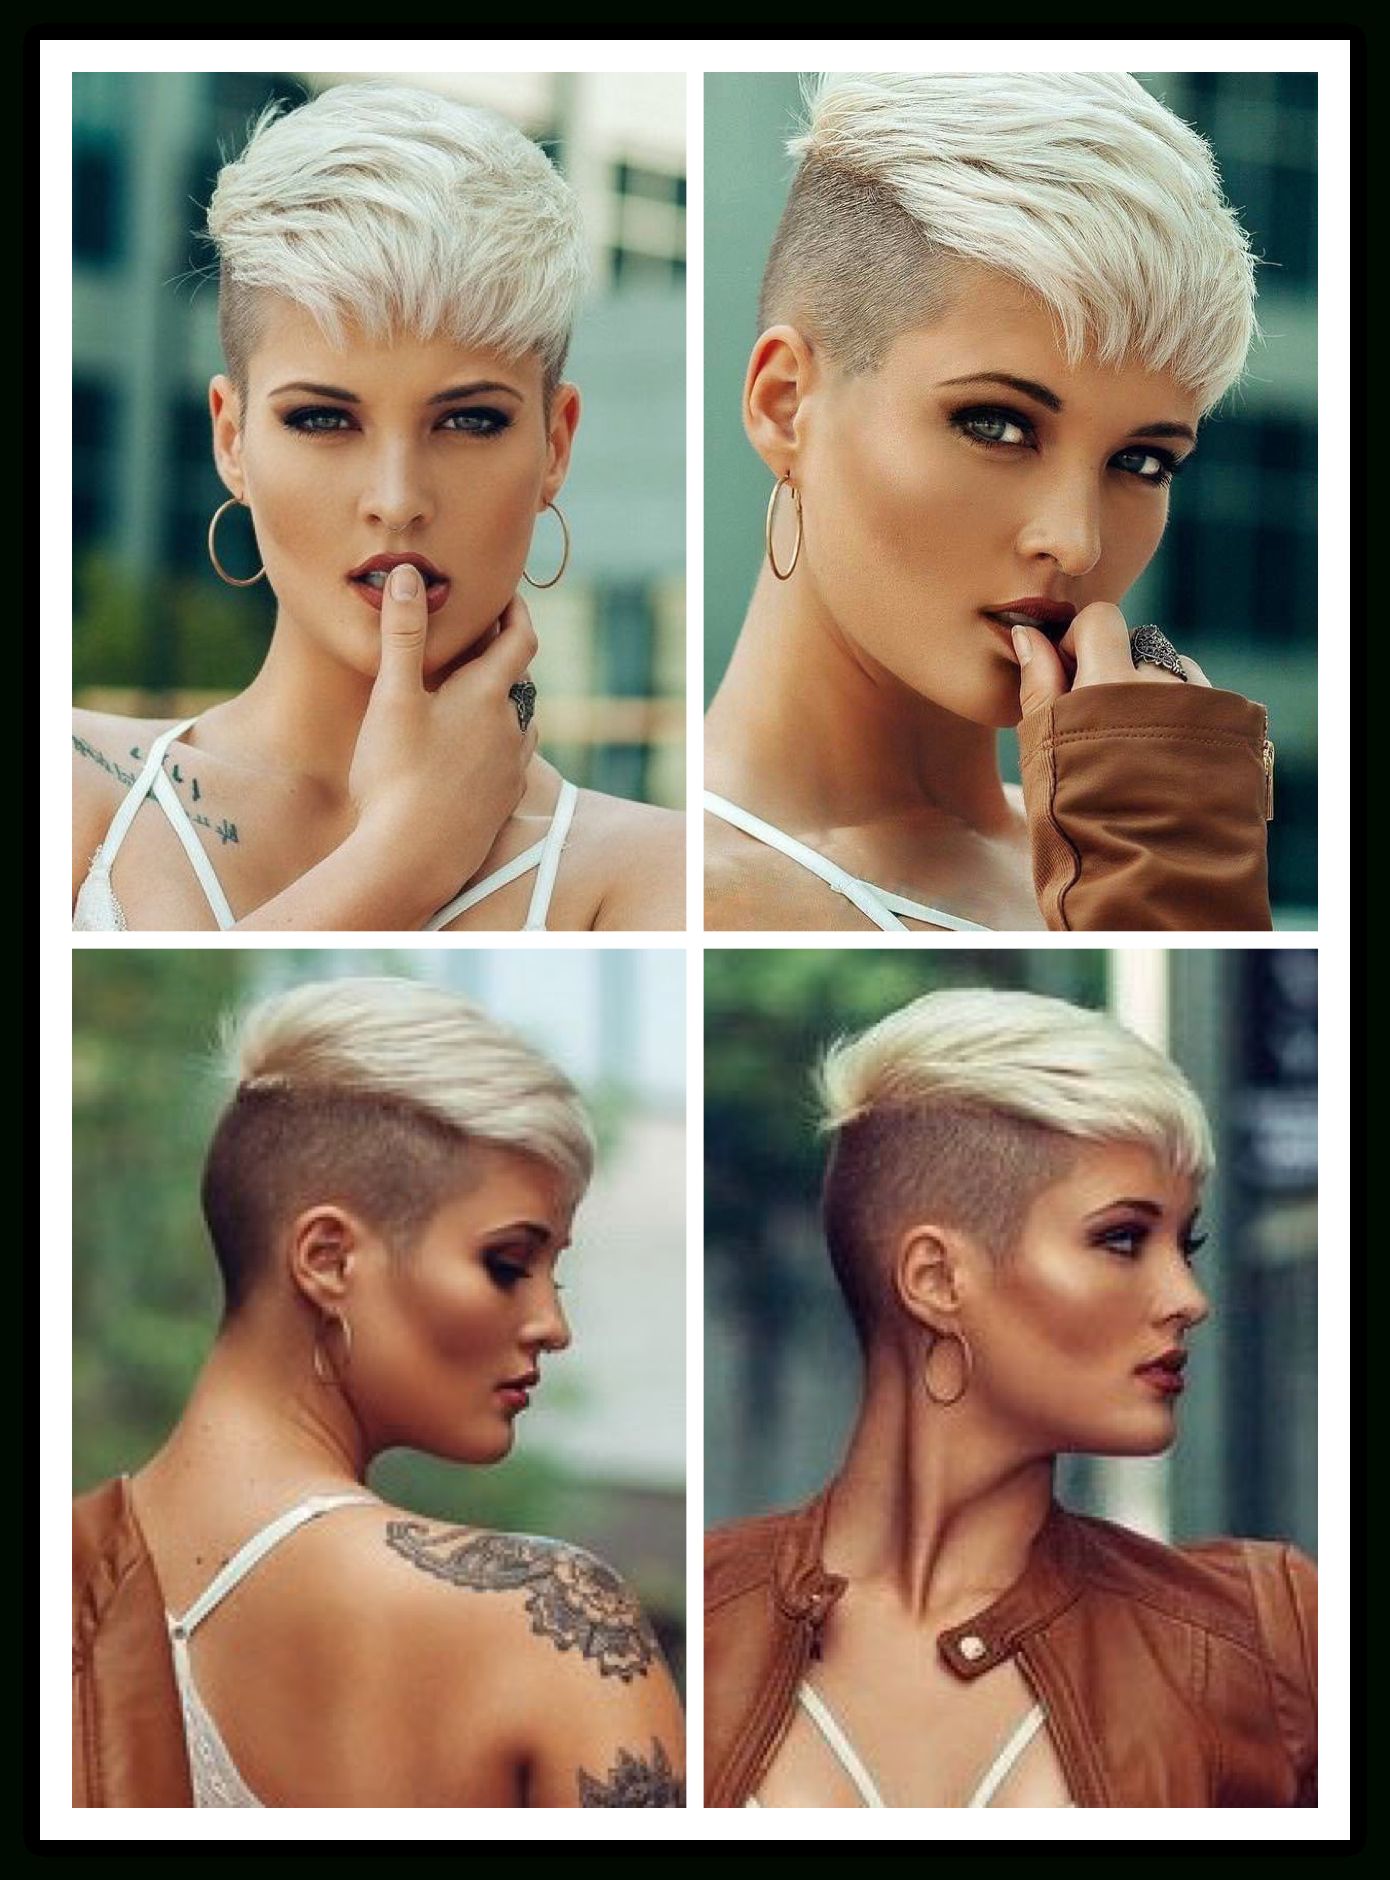 Pintara Hornback On Hair | Pinterest | Face, Short Hair And Pixies Intended For Short Edgy Girl Haircuts (View 14 of 26)